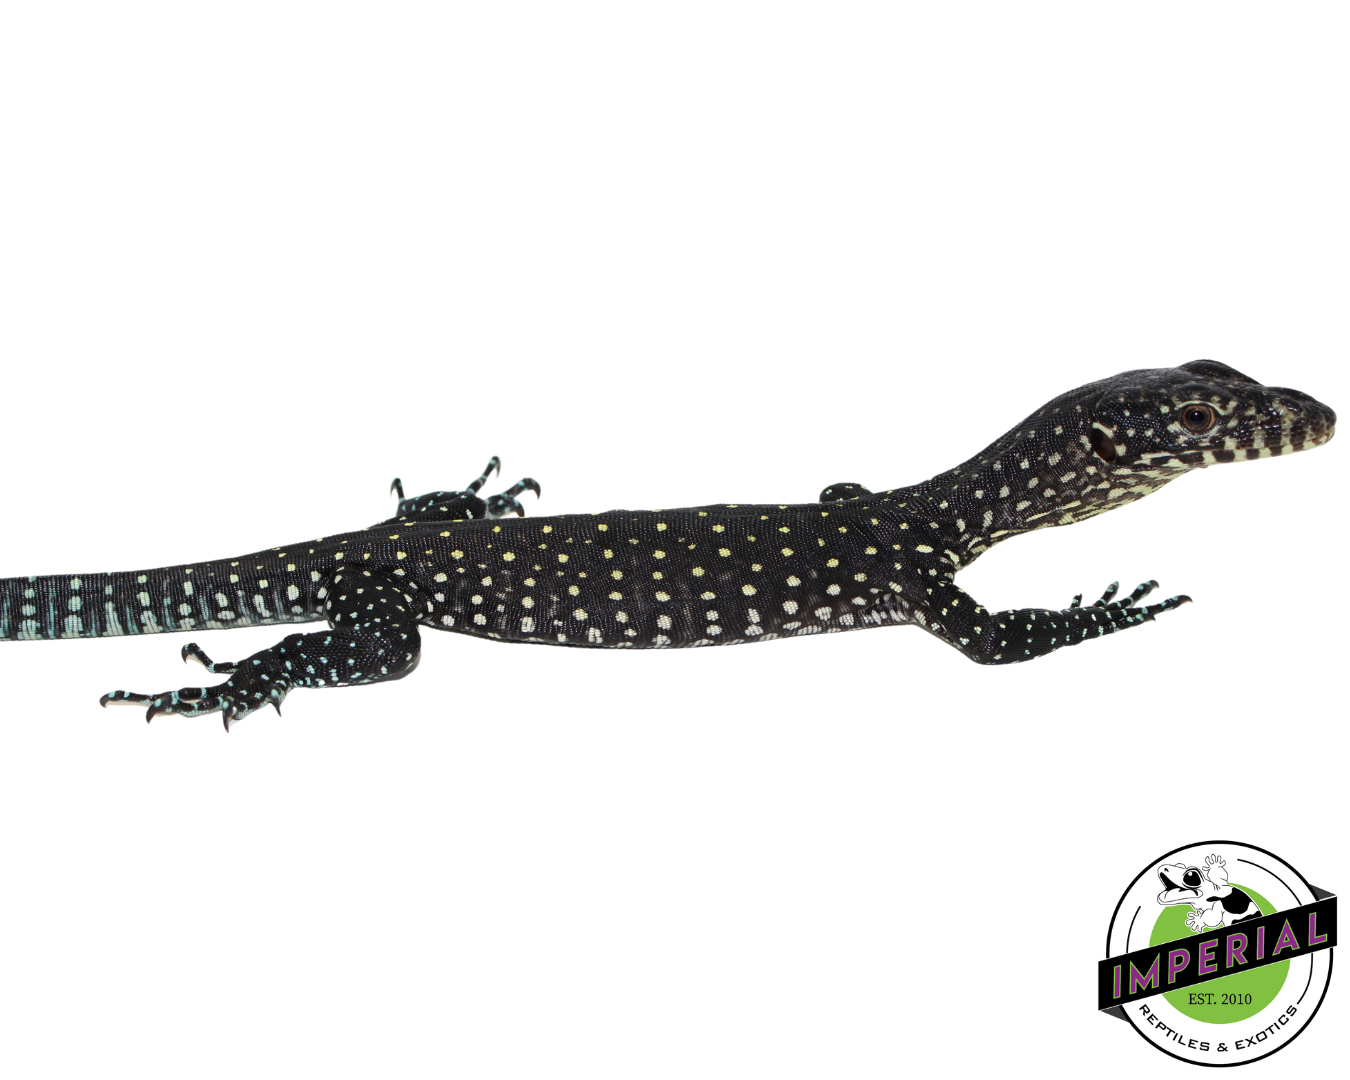 blue tail monitor lizard for sale, buy reptiles online